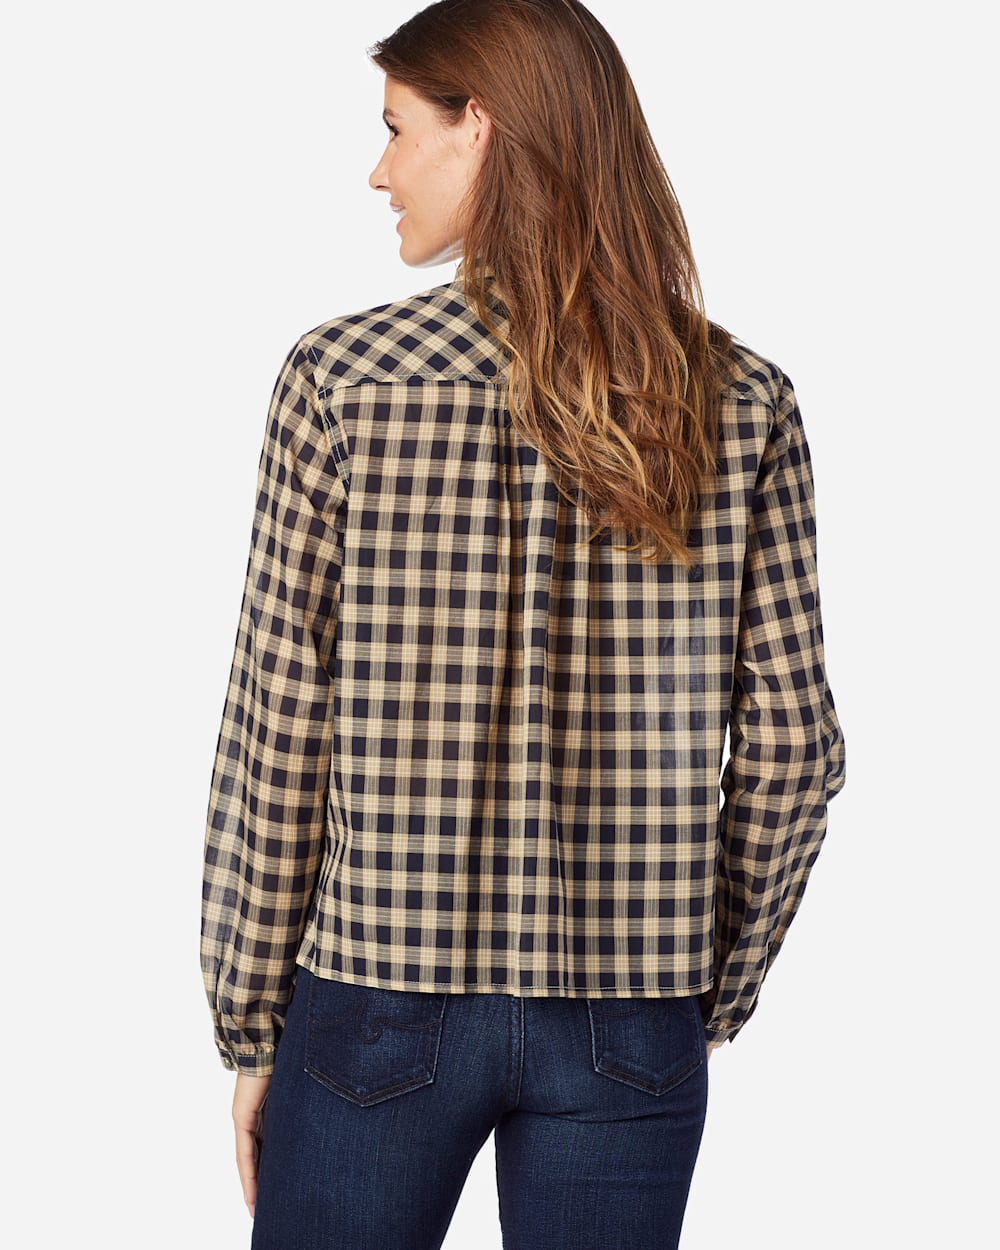 WOMEN' S AIRY COTTON SHIRT IN NAVY/TAN CHECK image number 3